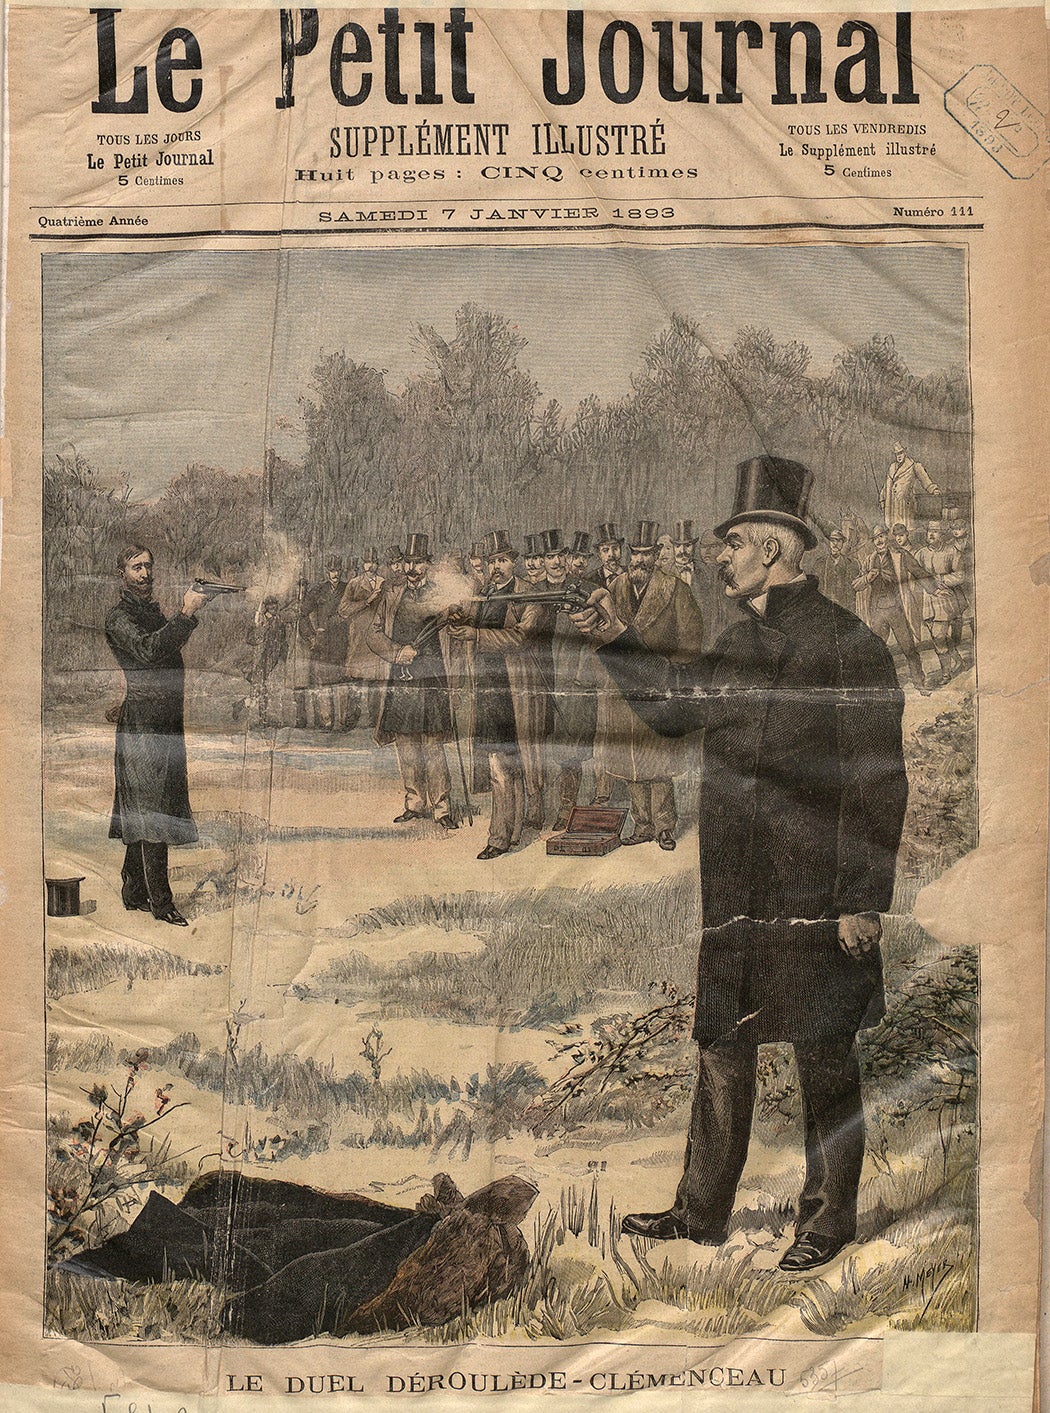 The January 7, 1893 cover of <em>Le Petit Journal</em>, featuring an illustration of a duel between Paul Déroulède and Georges Clemenceau 